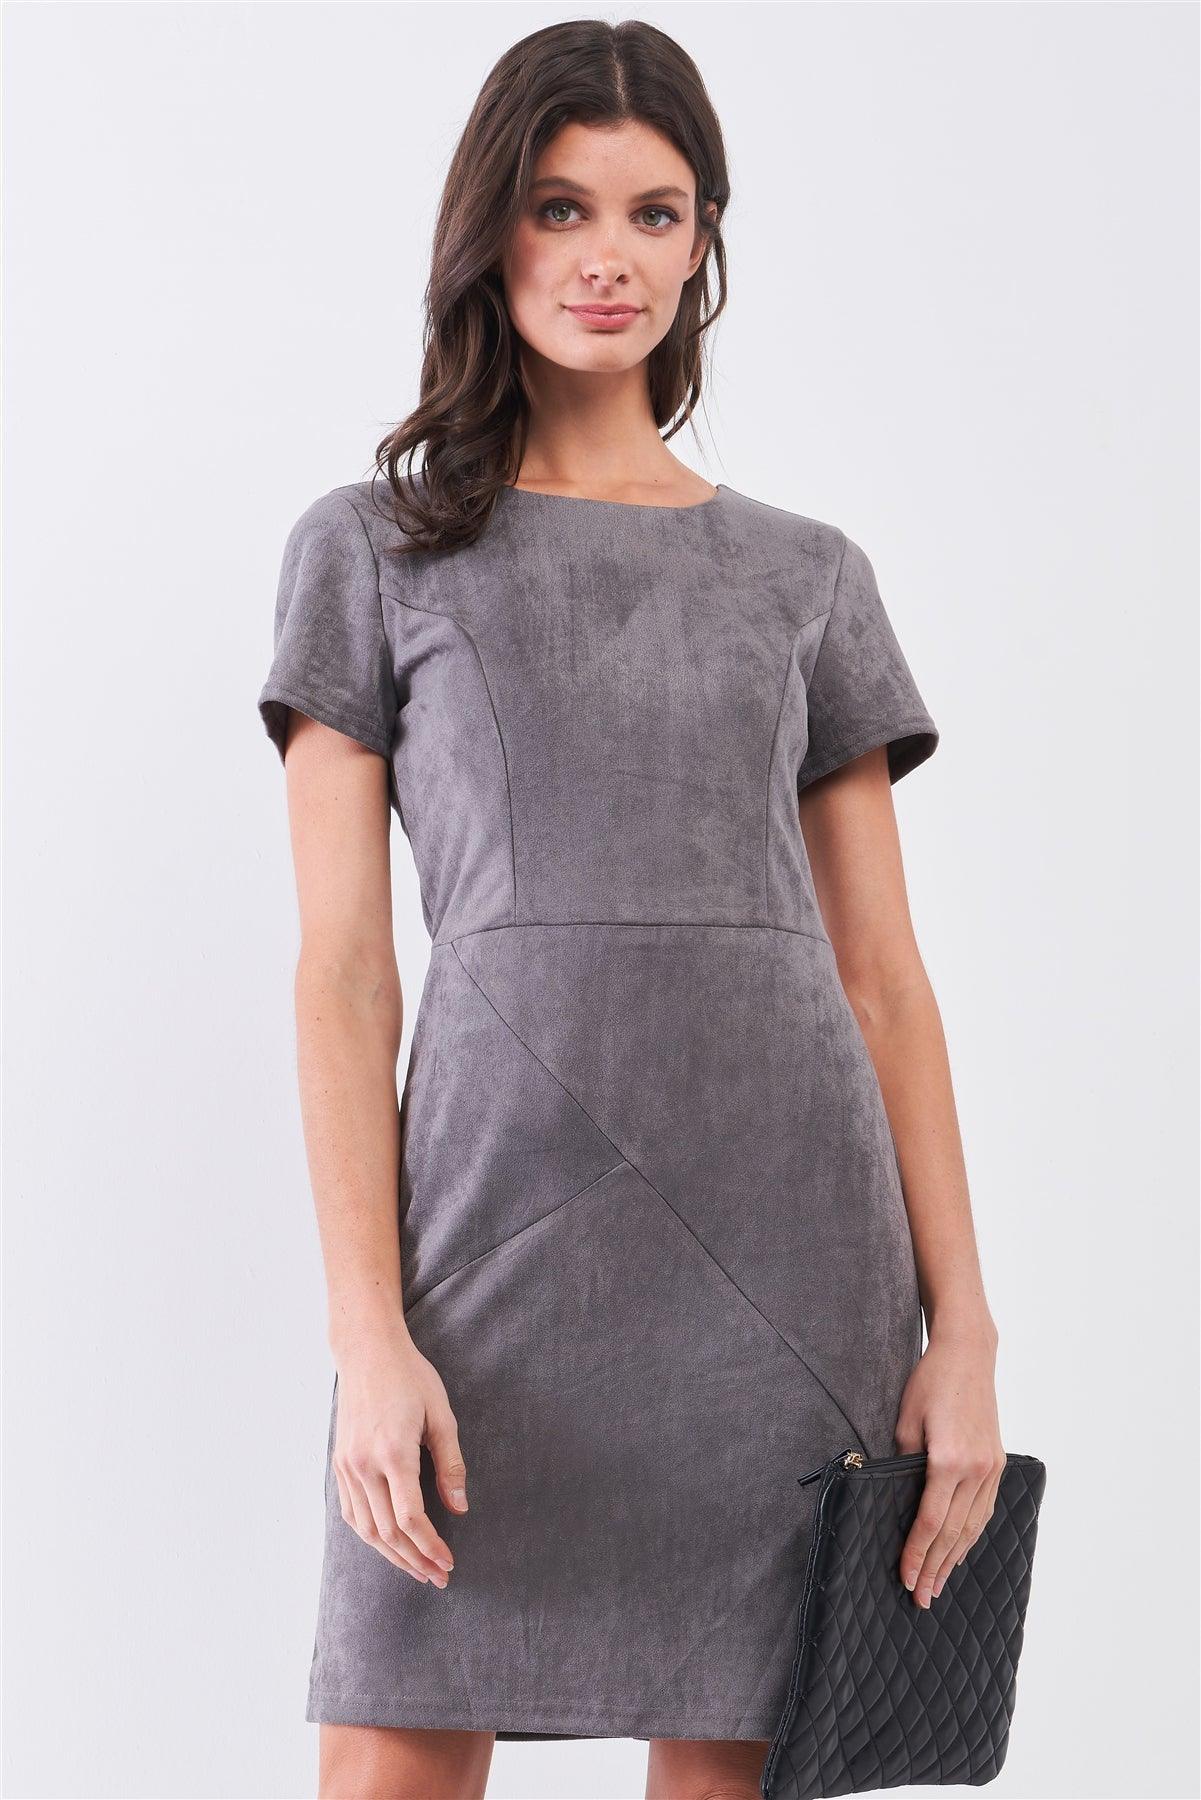 Heather Grey Faux Suede Short Sleeve Round Neck Fitted Mini Dress /1-2-2-1